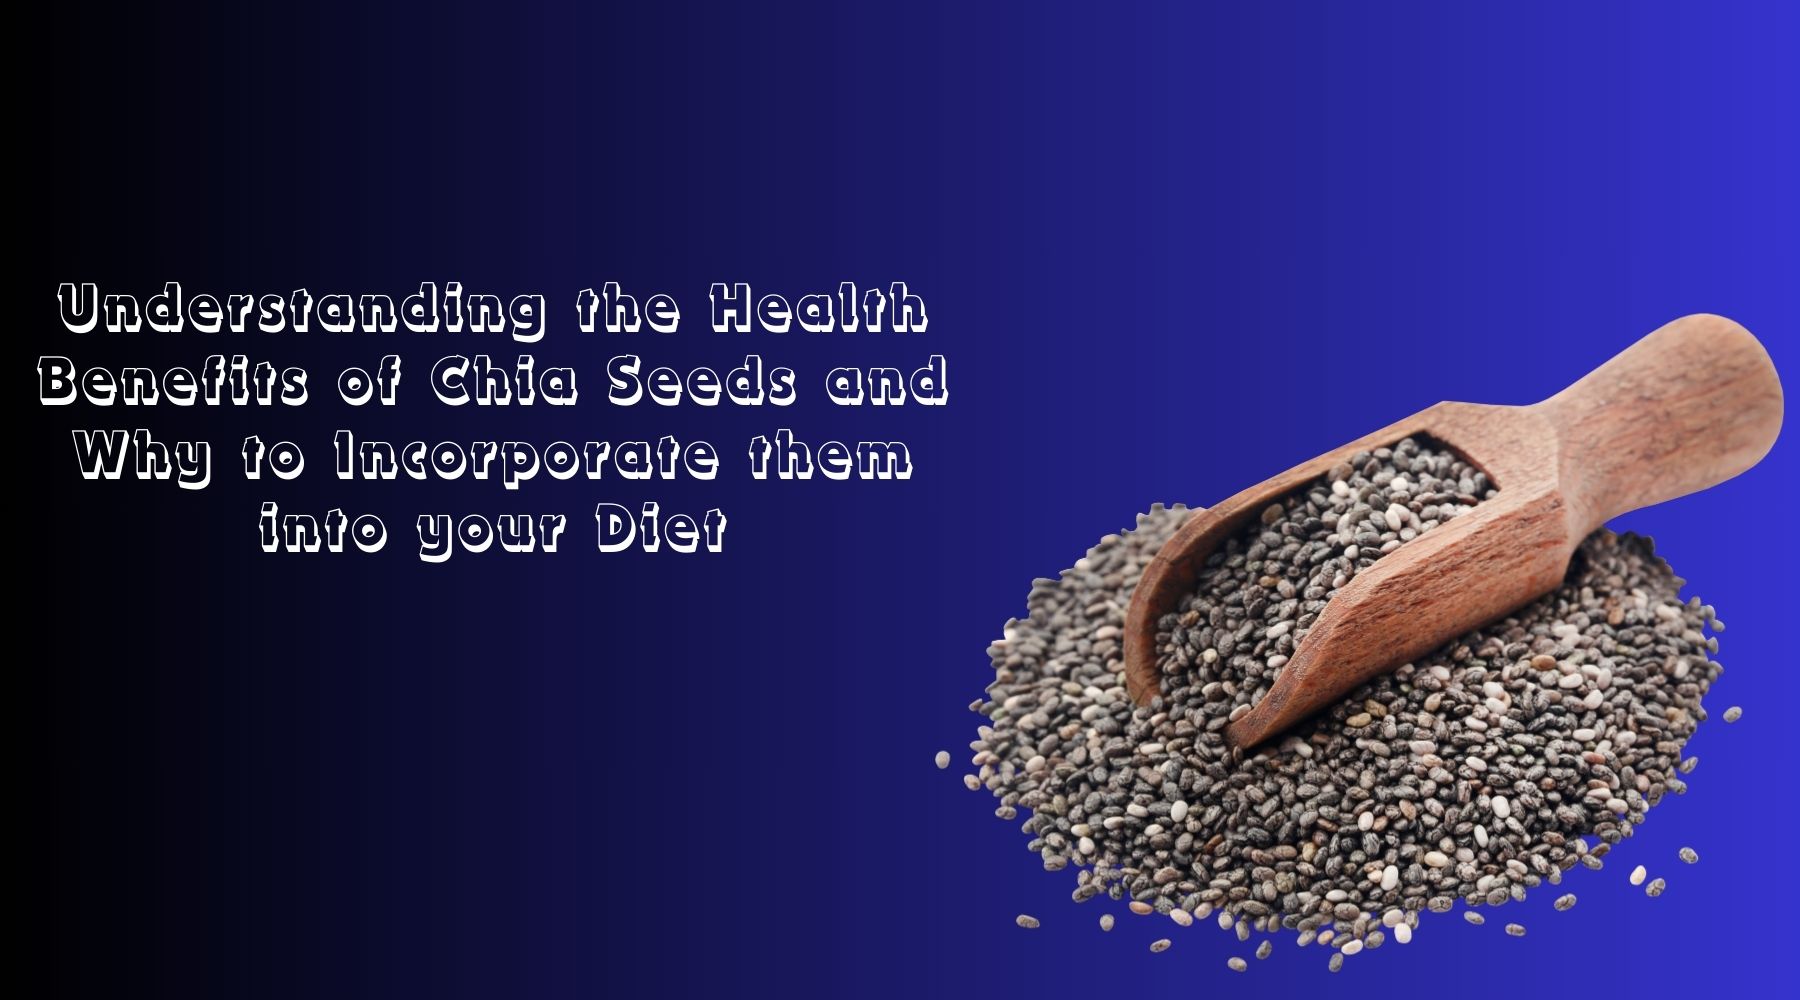 Benefits of Chia Seeds and Ways to Eat Them